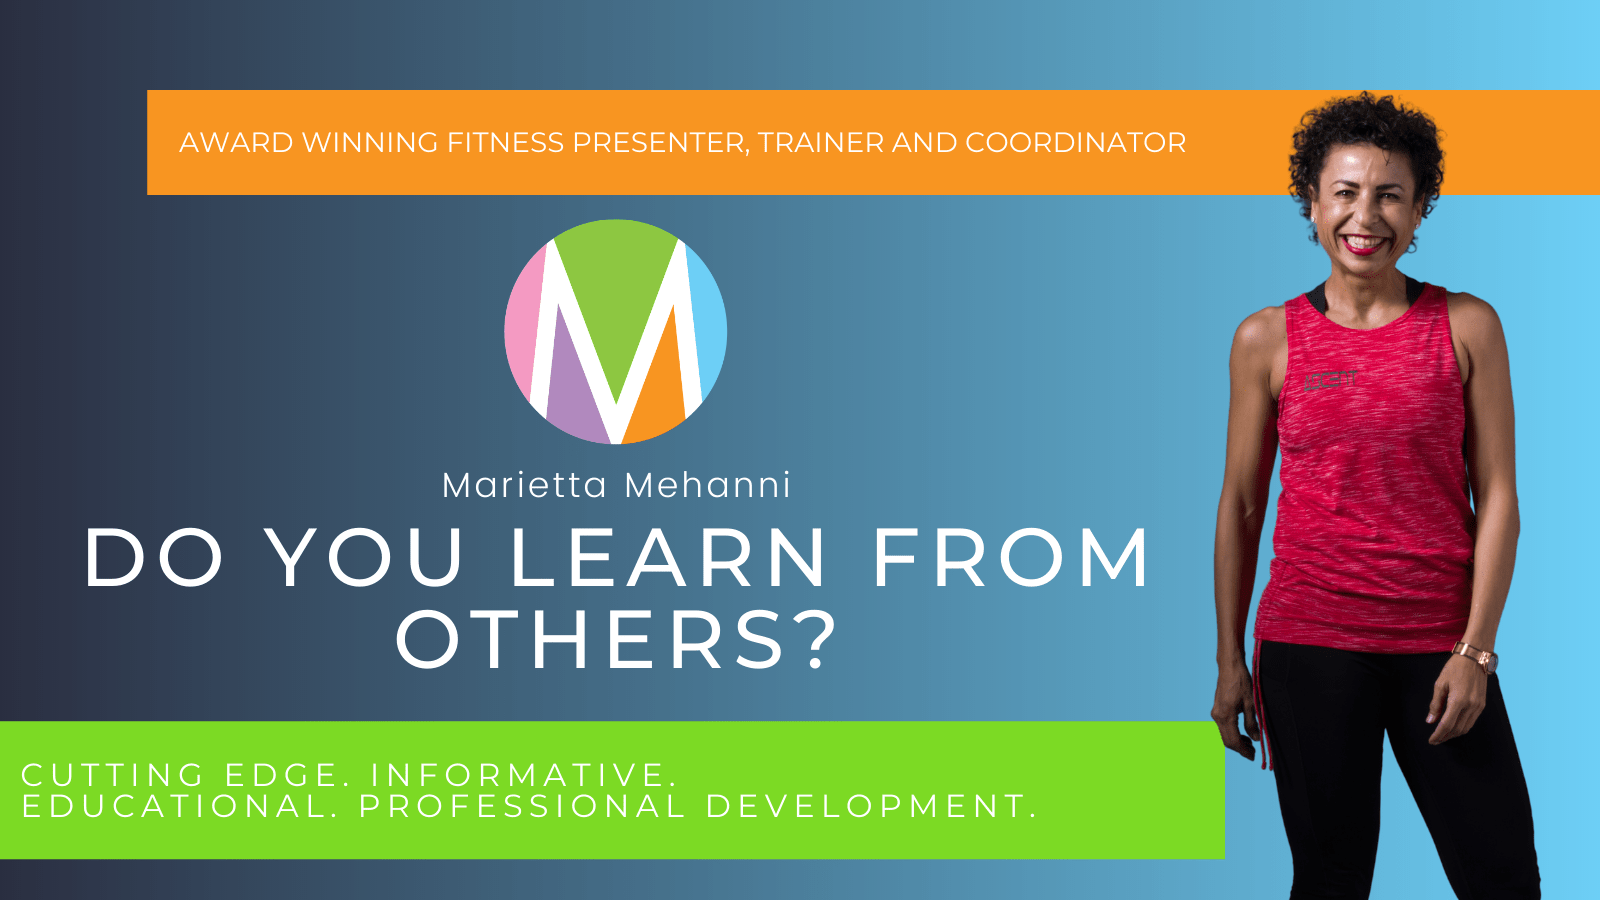 blog do you learn from others marietta mehanni education professional development group fitness personal training informative fitness guru presenter